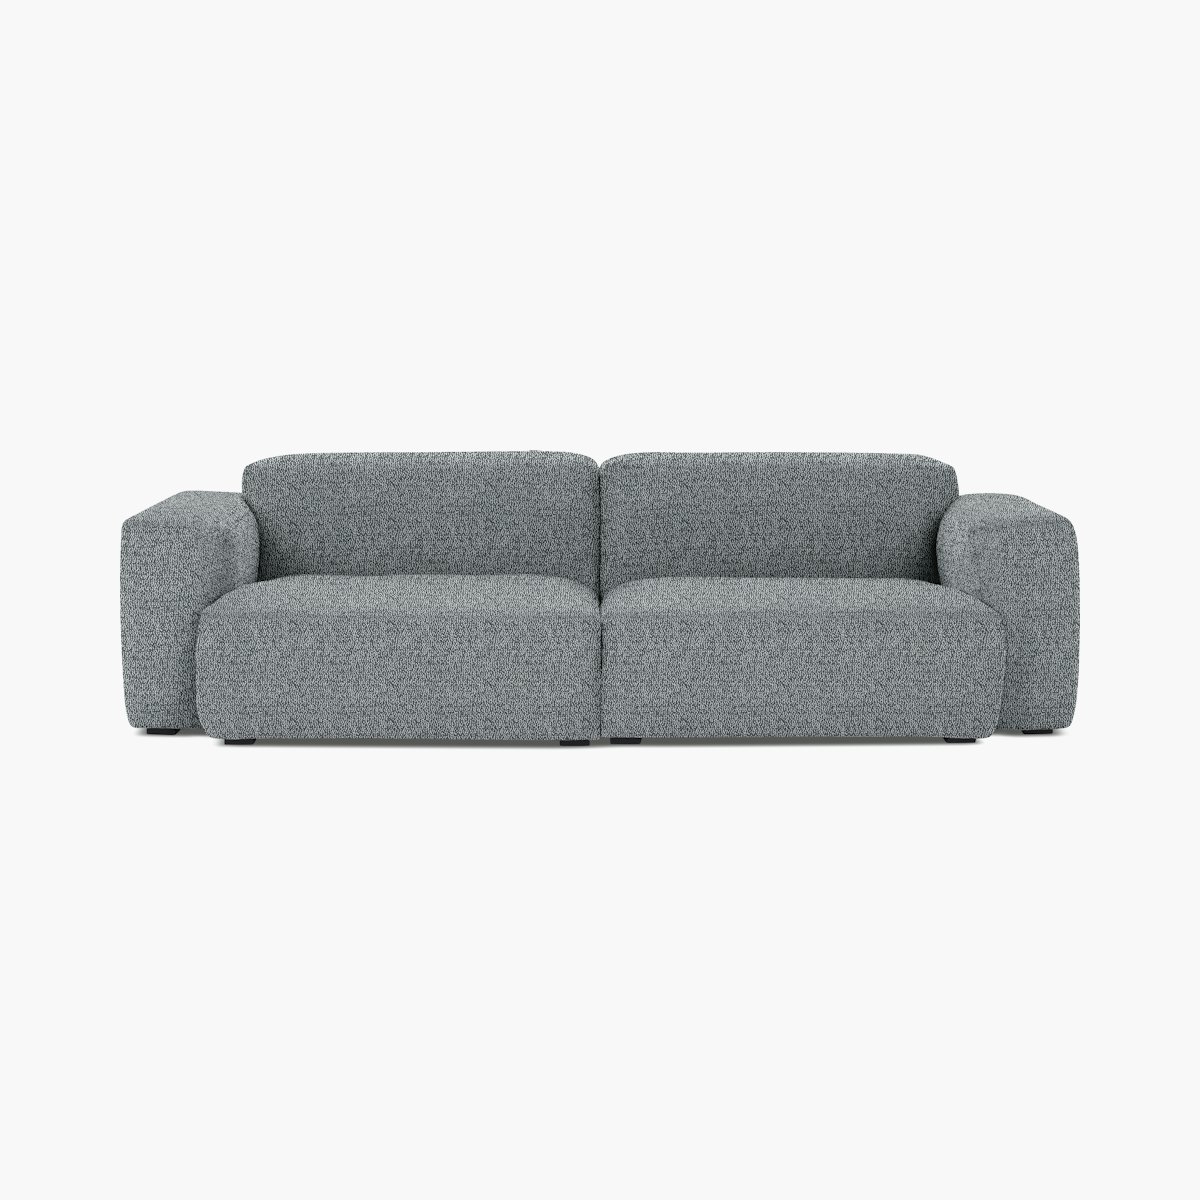 Mags Soft Low 2.5-Seat Sofa